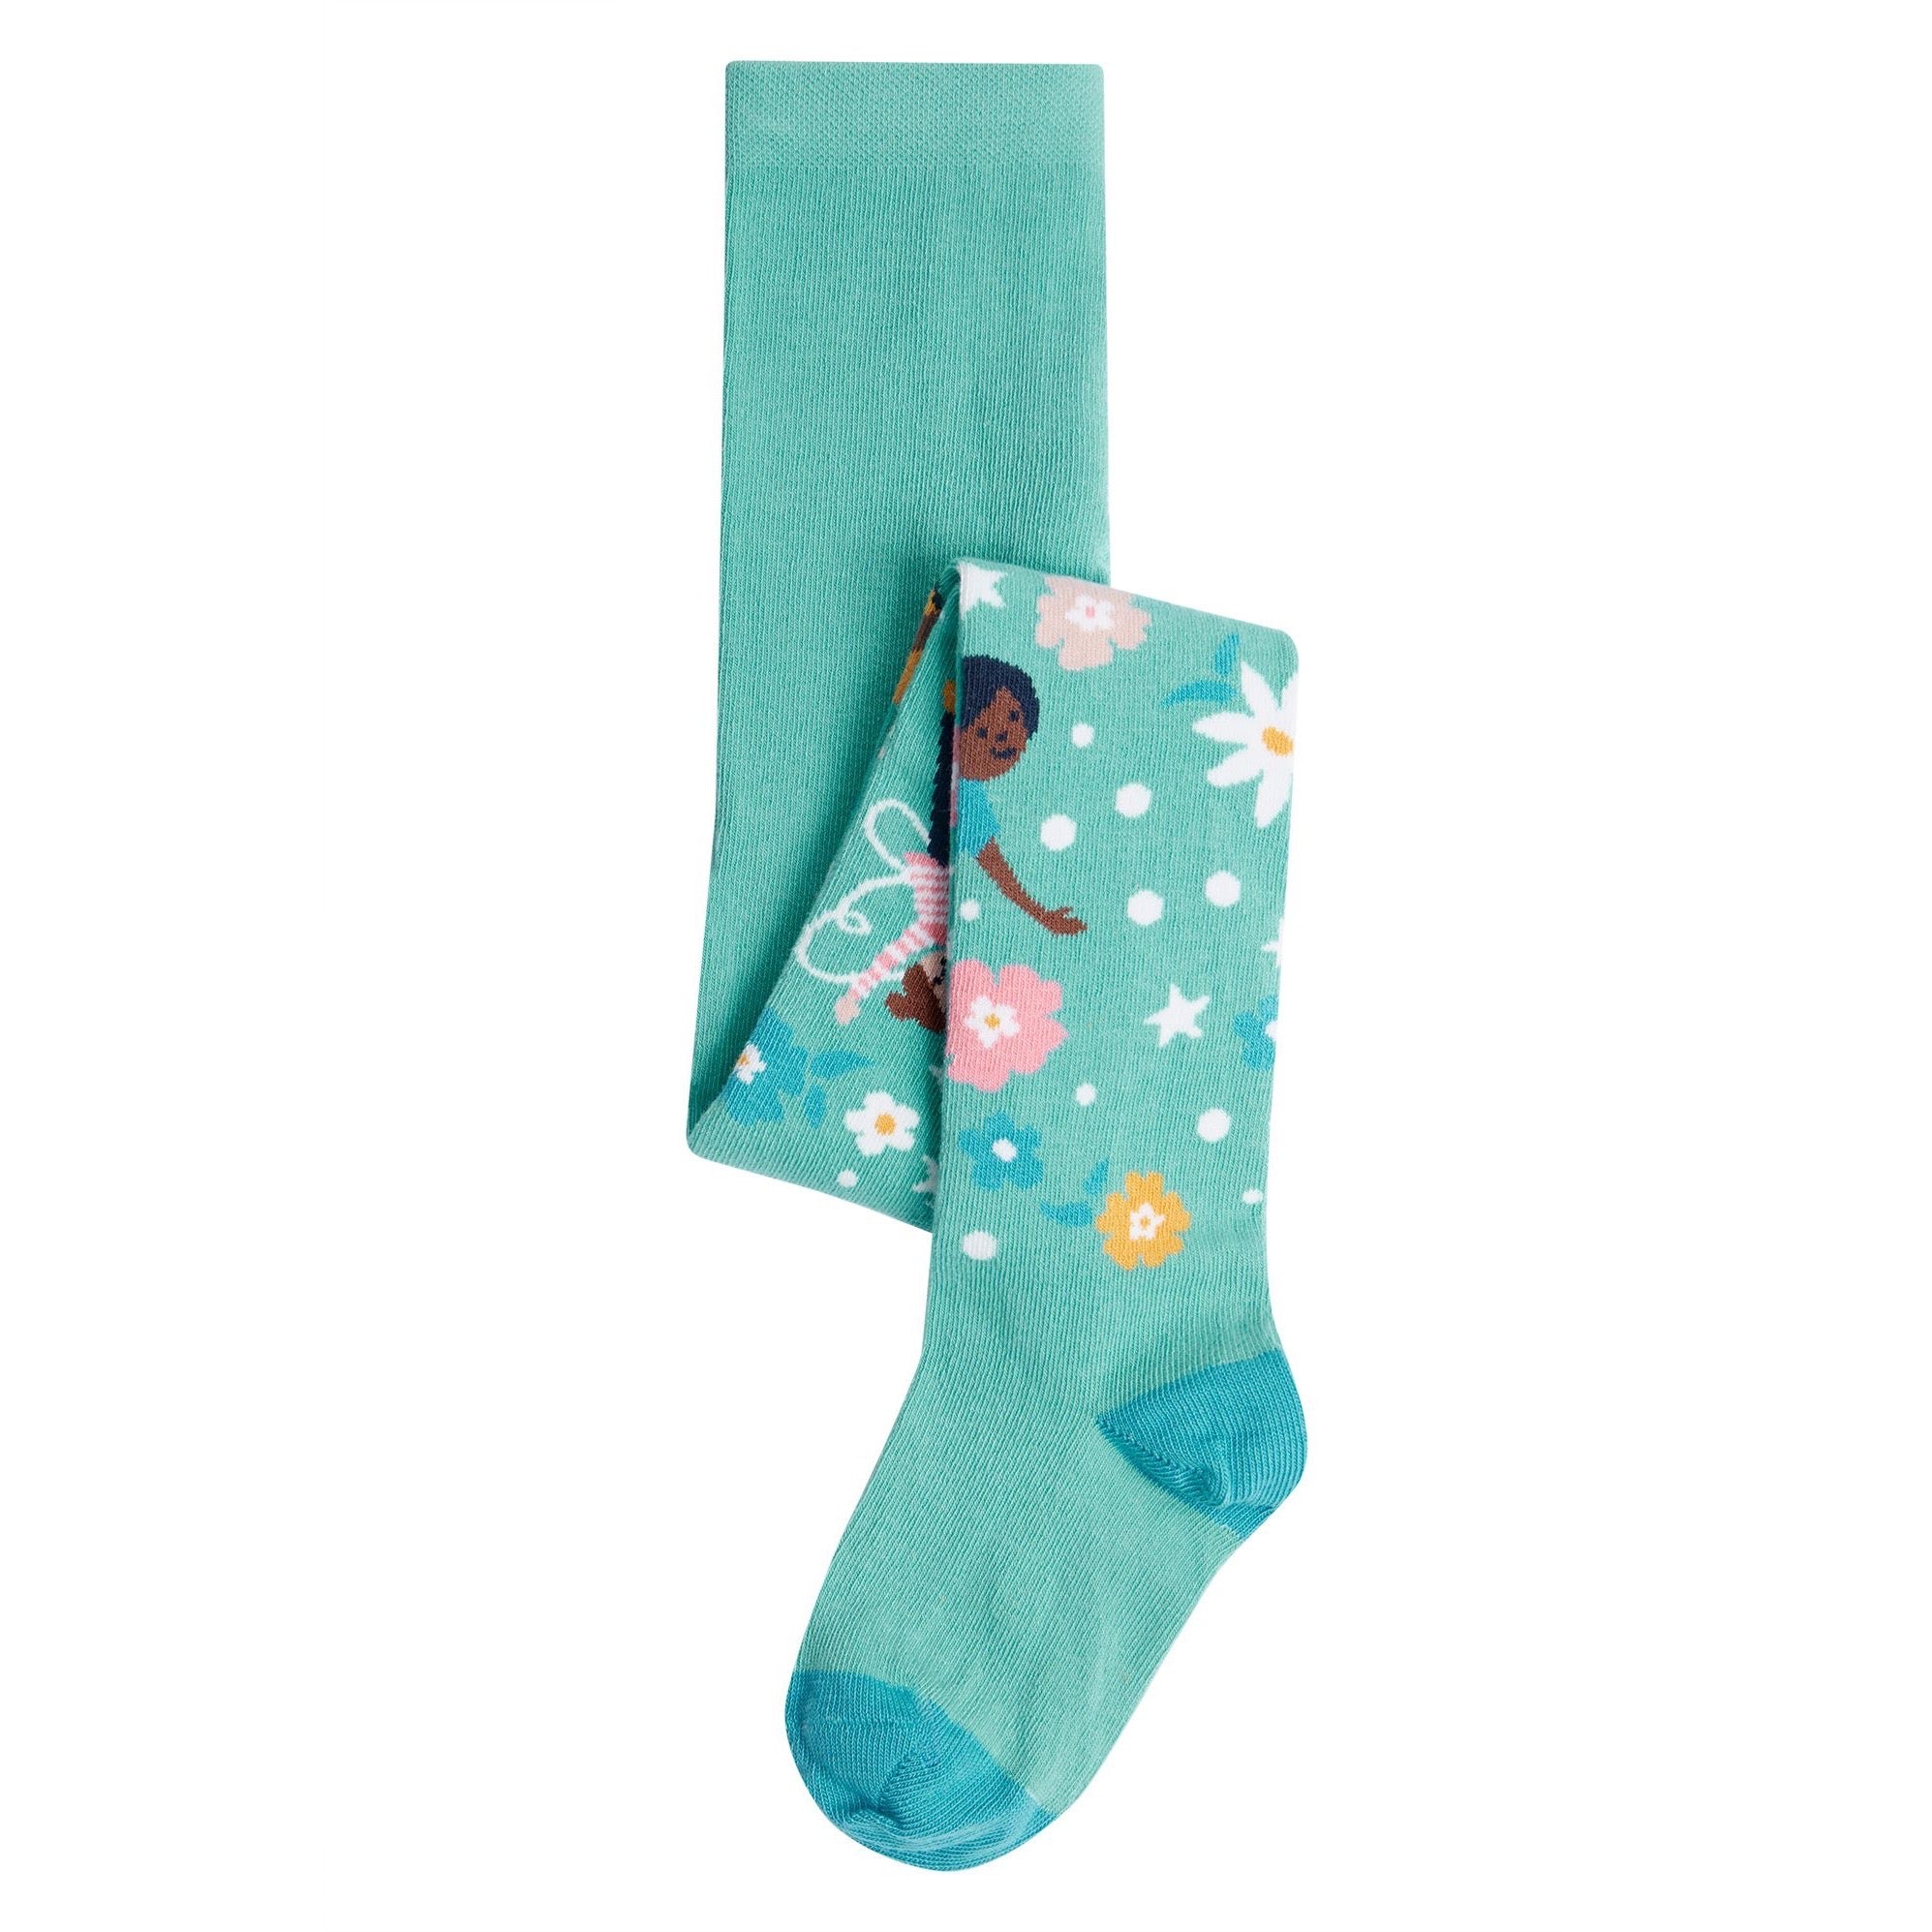 Frugi Infant Norah Tights Forest Fairies Clothing 6-12M / Seagrass,1-2YRS / Seagrass,2-4YRS / Seagrass